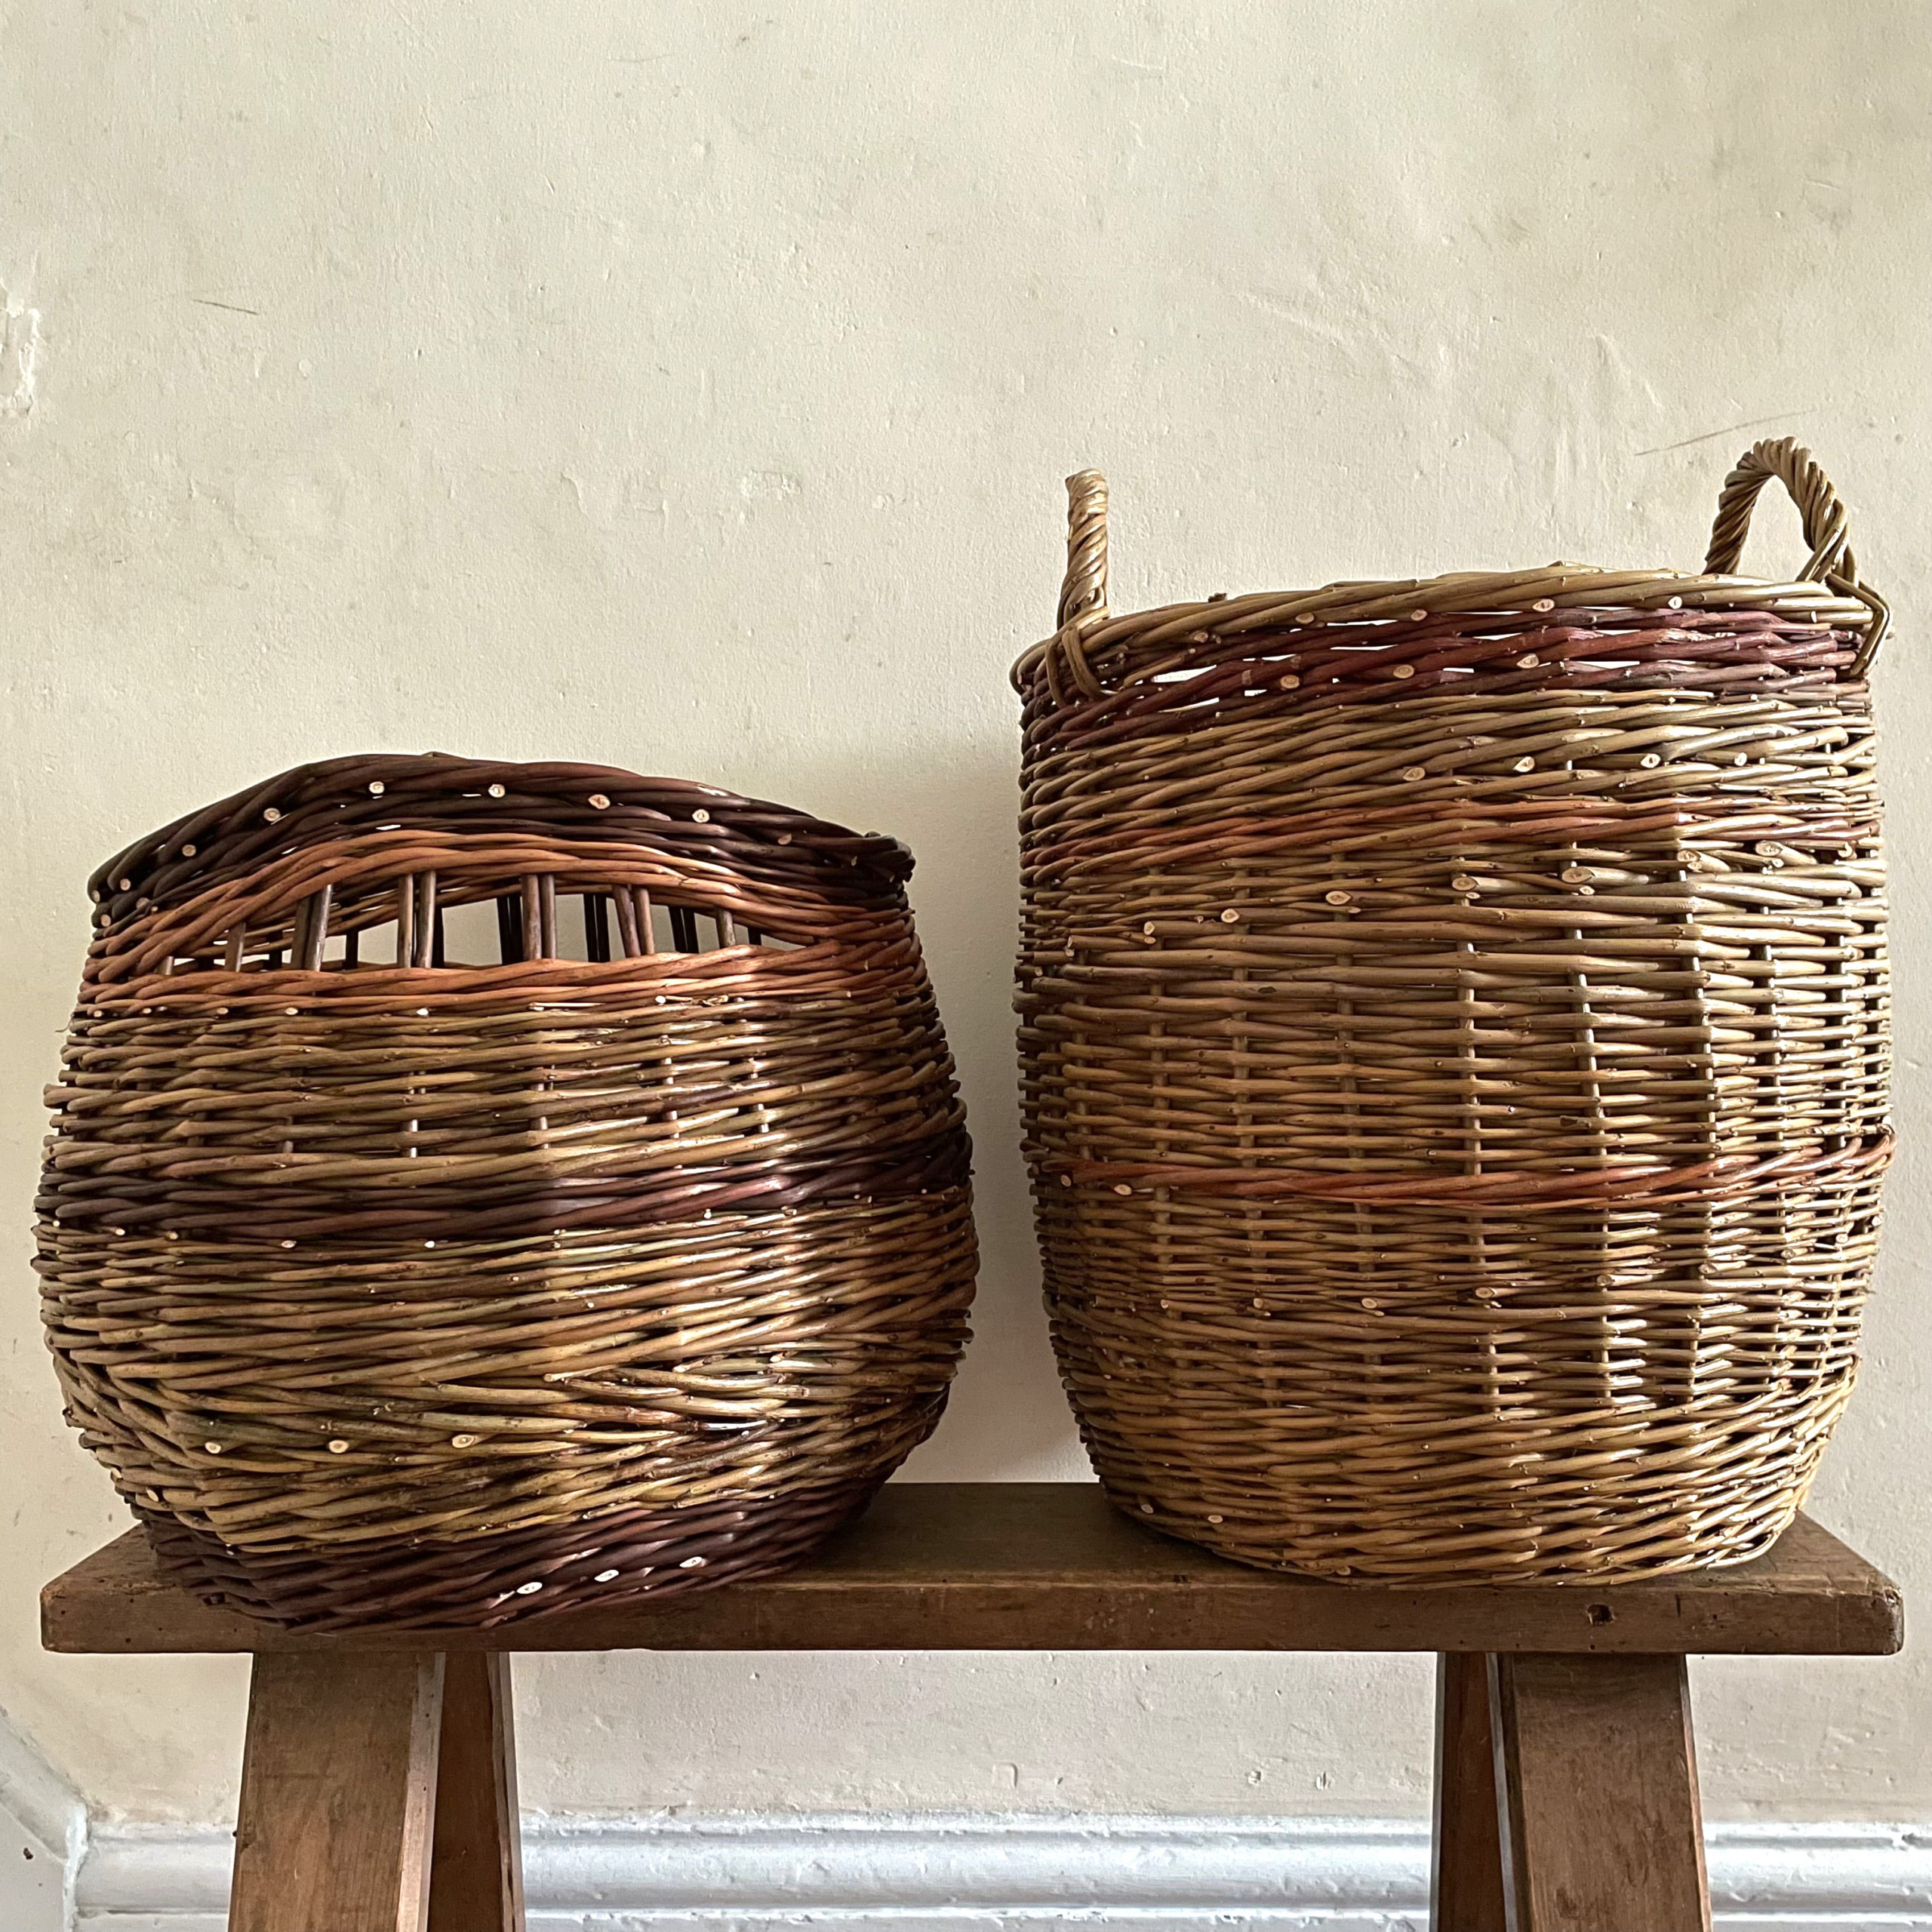 2 Day Round Willow Basket Workshop Wednesday 17th & Thursday 18th July